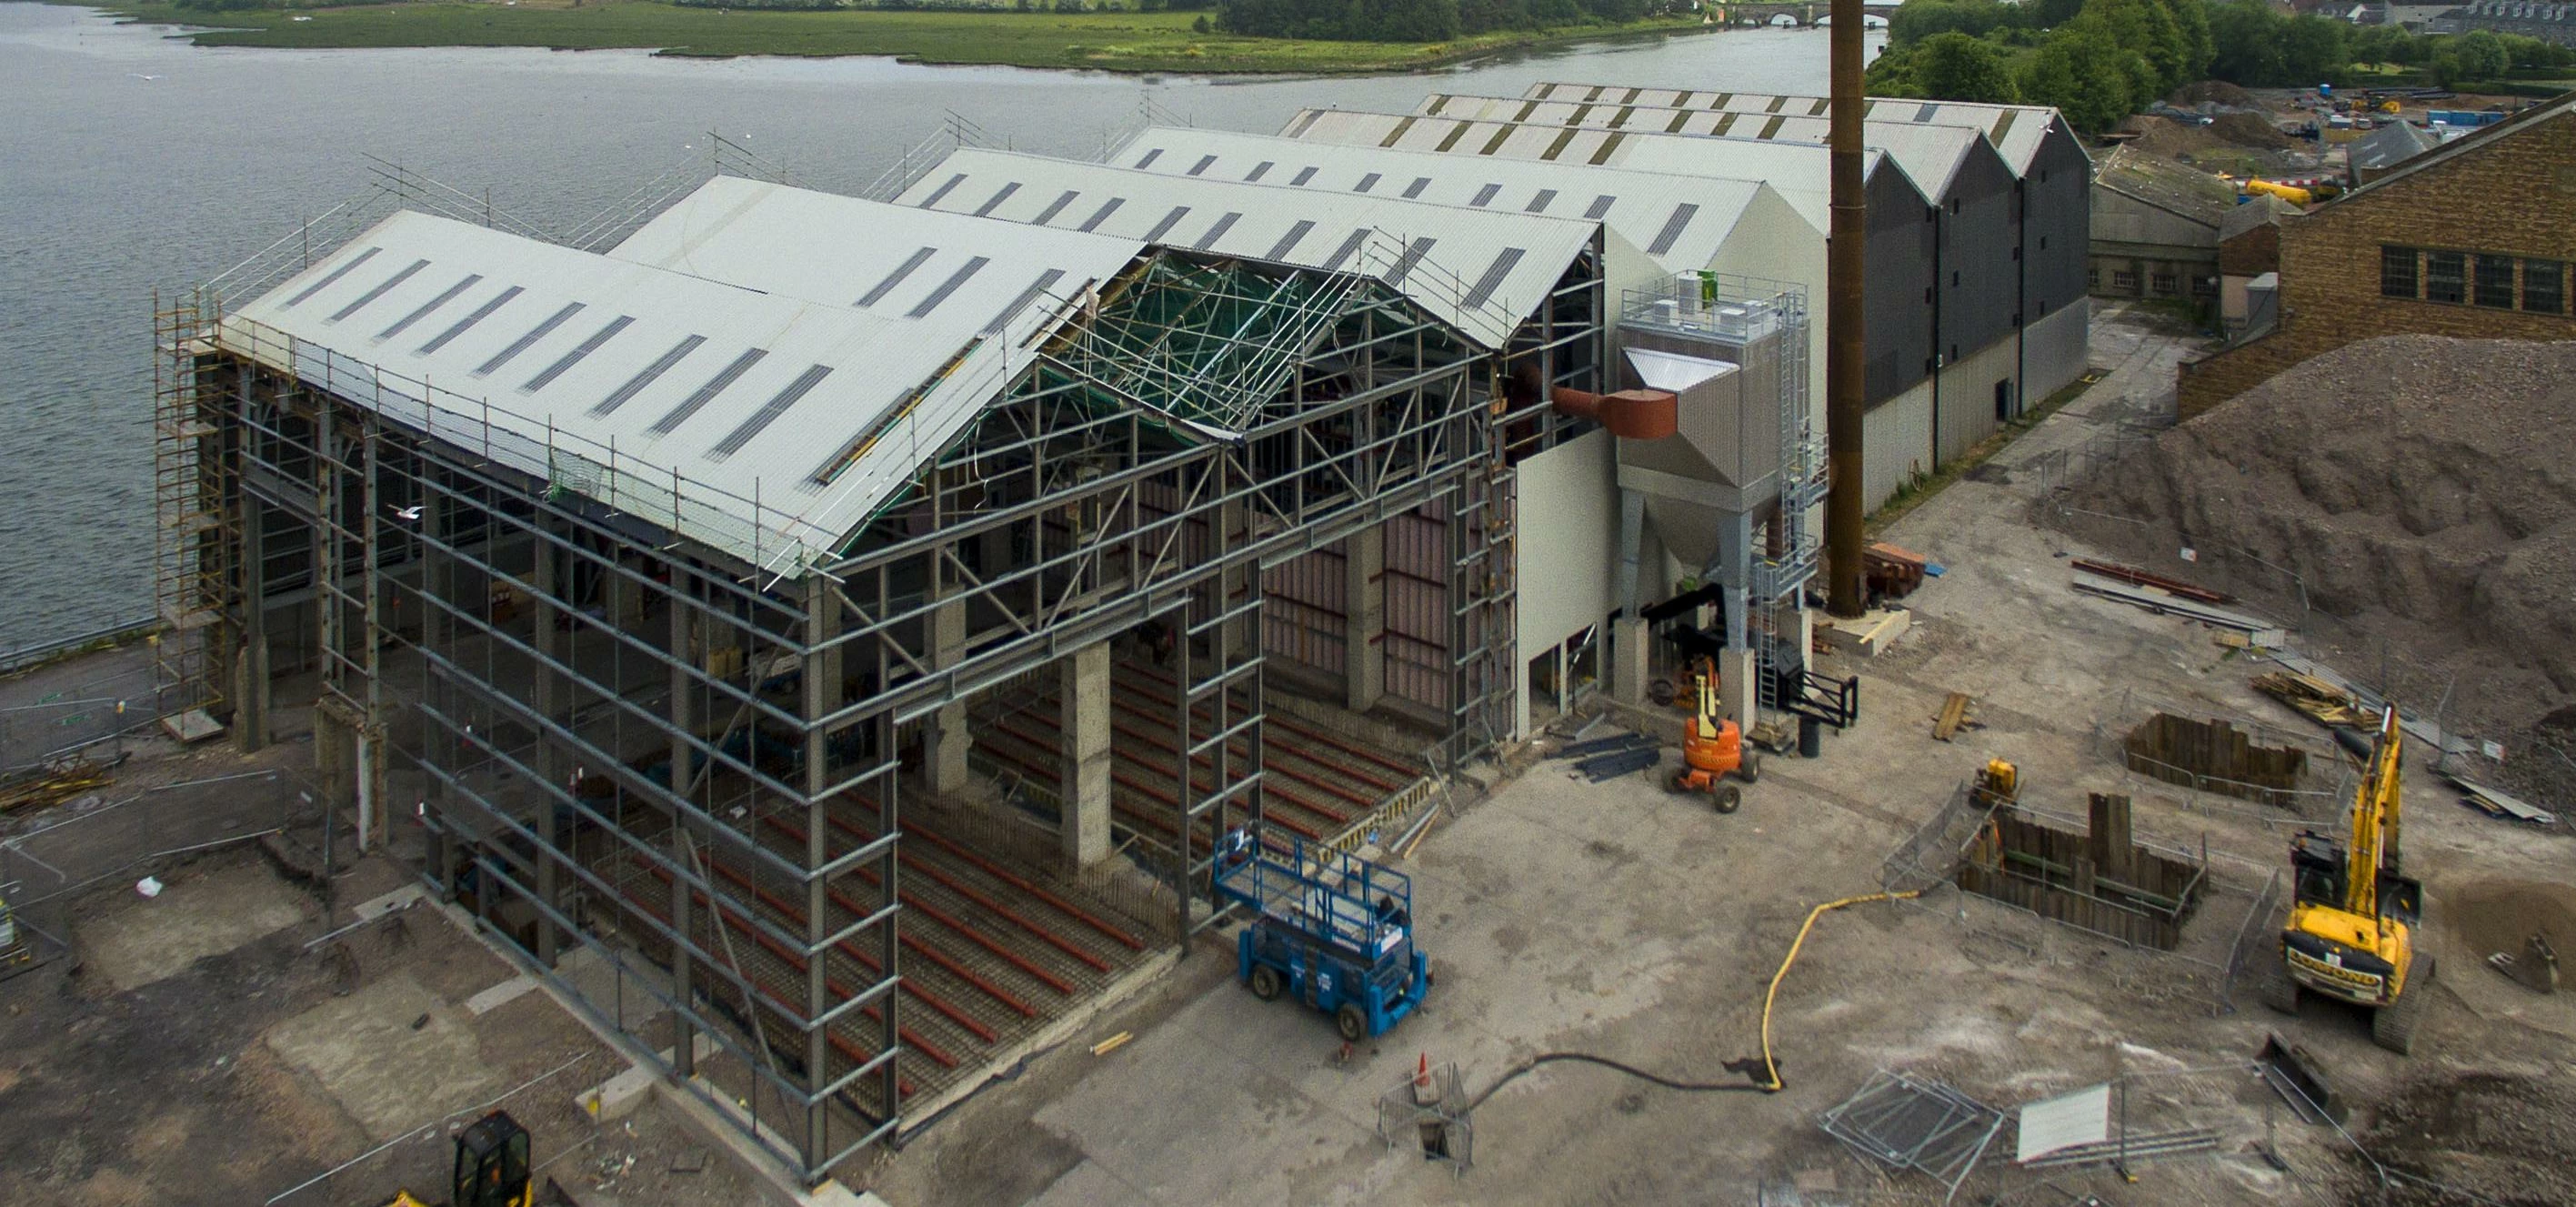 The 6.5MW Biomass Boiler Will Be At The Heart of The University of St Andrews' £25 million energy pr